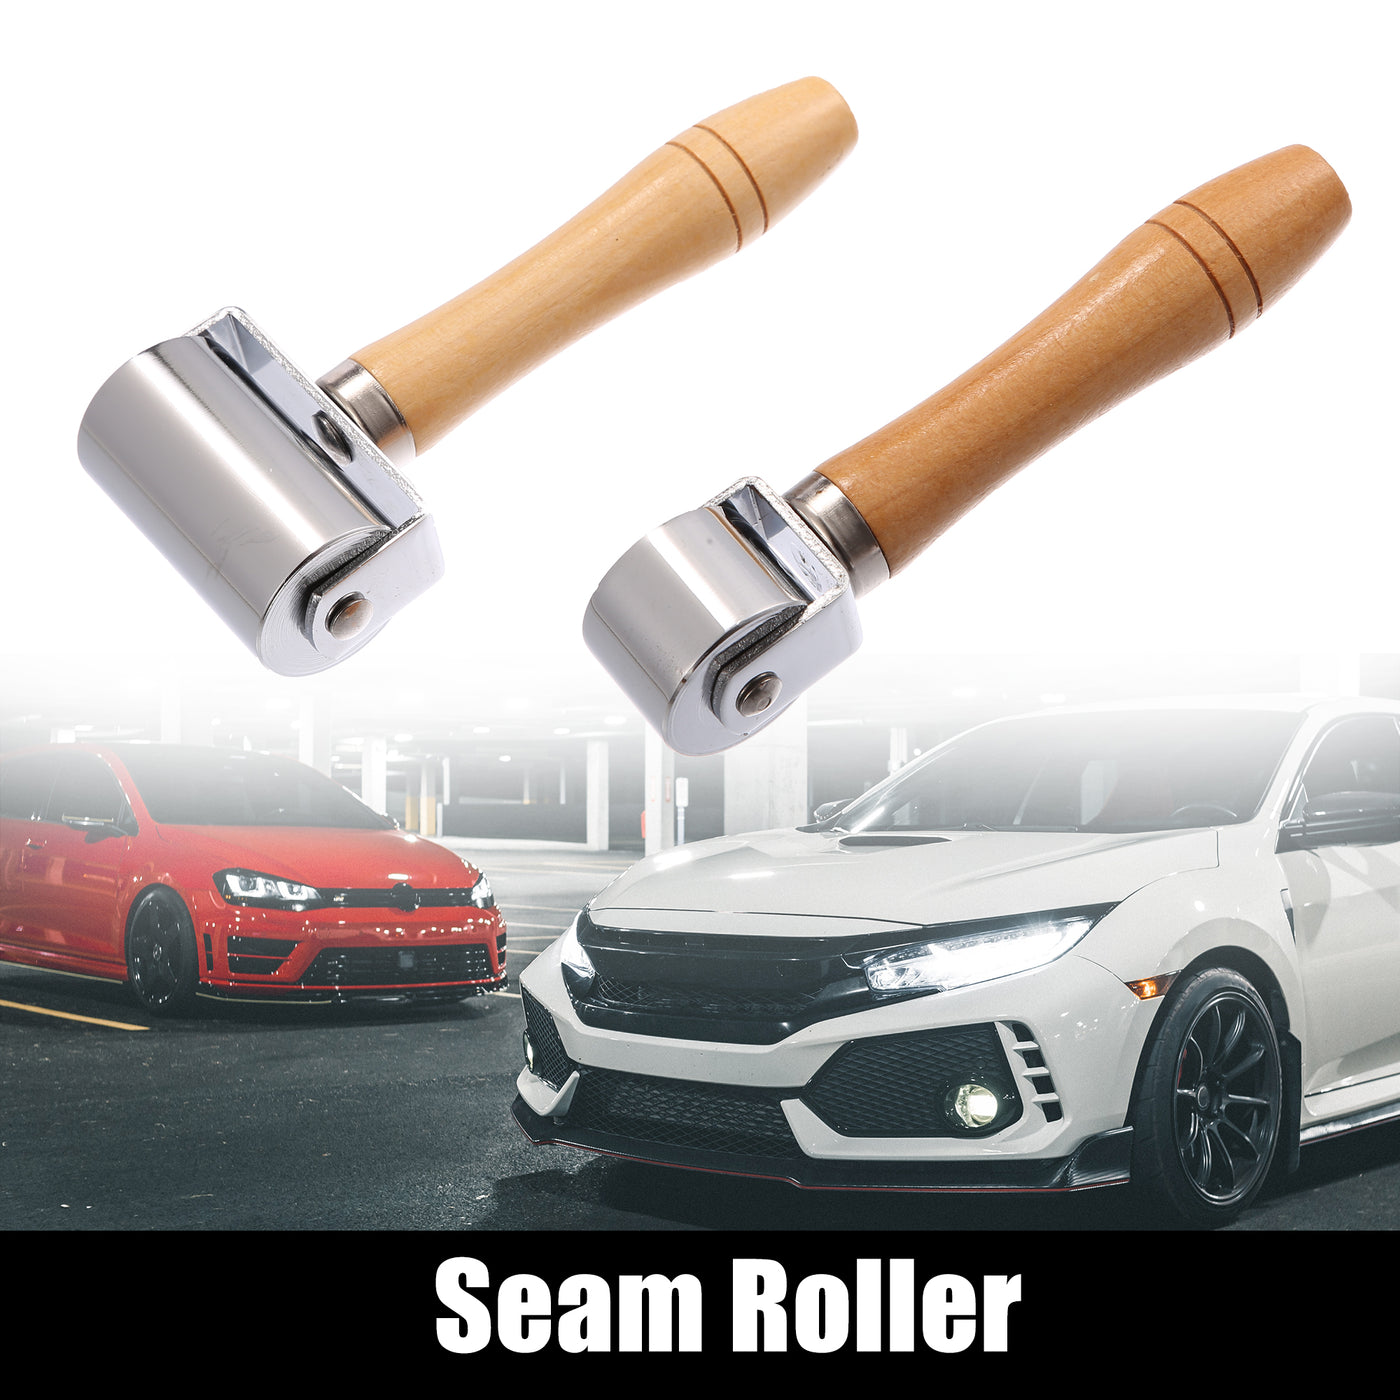 X AUTOHAUX 1Set Steel Seam Roller 2.5cm/0.98" and 6cm/2.36" Roofing Bearing Flat for Wallpaper Car Audio Sound Deadener Auto Noise Pressure Smoothing Laminate Paint DIY Tool